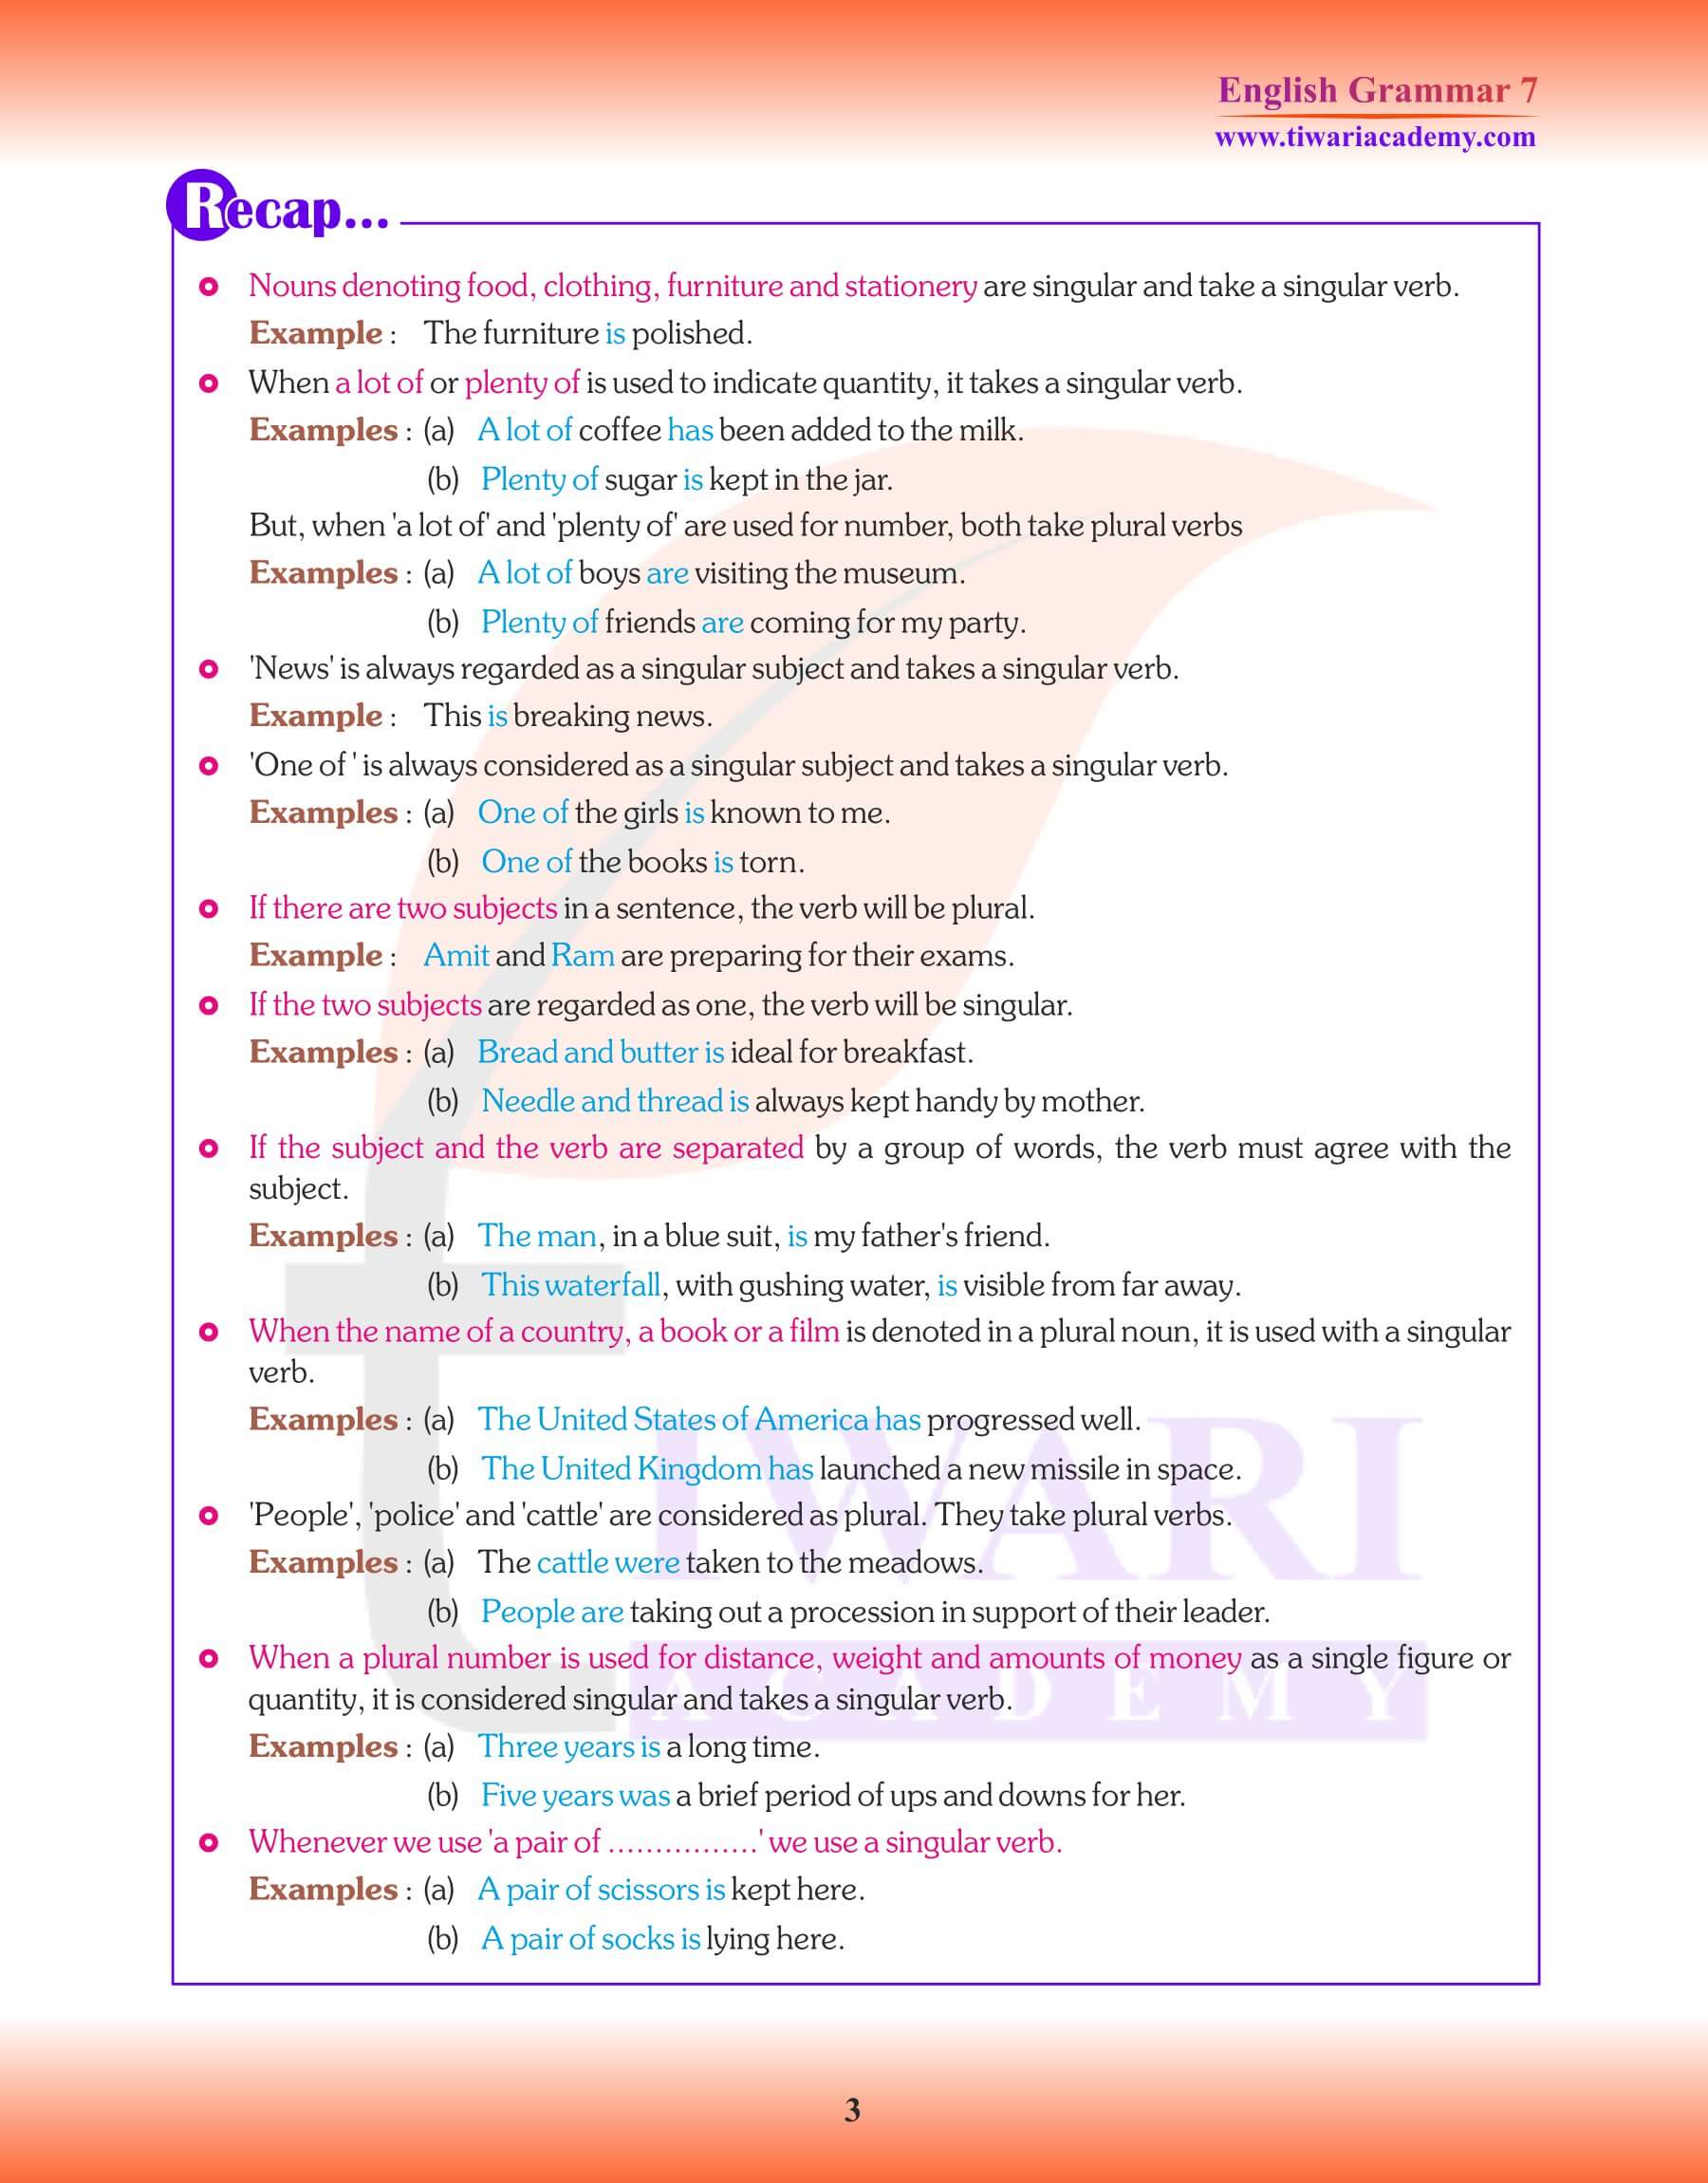 Class 7 English Grammar Chapter 10 Revision notes